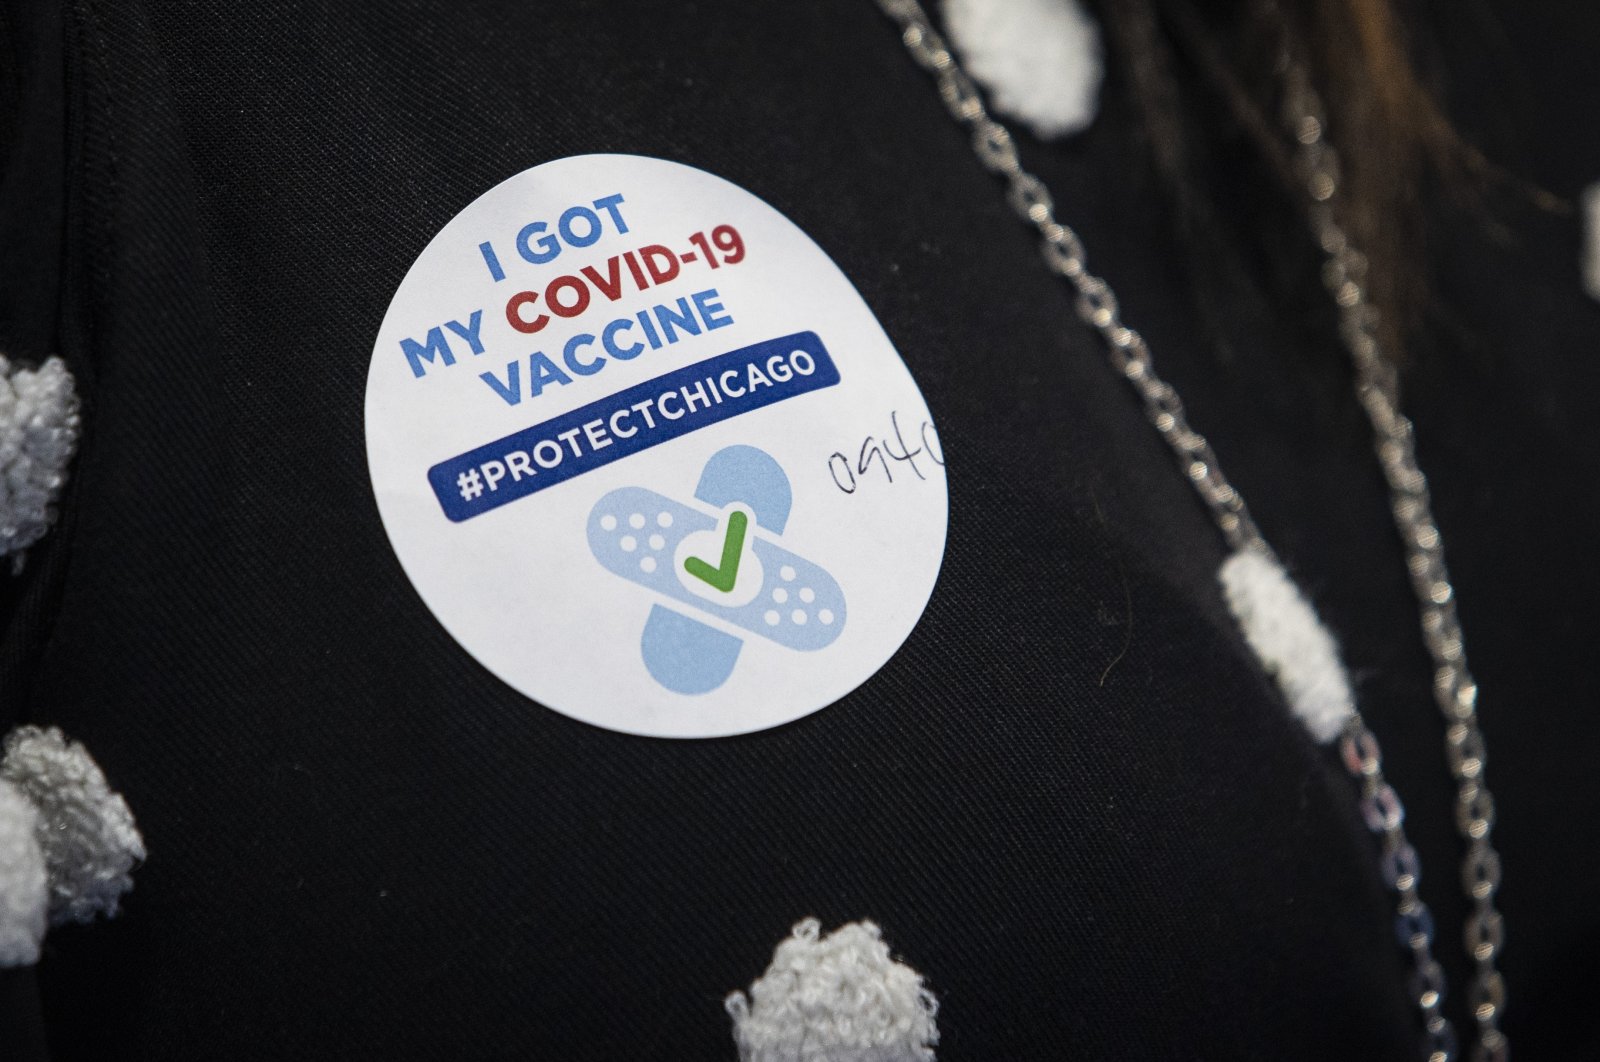 A sticker on a jacket after 10 people received their first dose of the Pfizer-BioNTech COVID-19 vaccine at Richard J. Daley College in Chicago, Jan 14, 2021. (AP Photo)